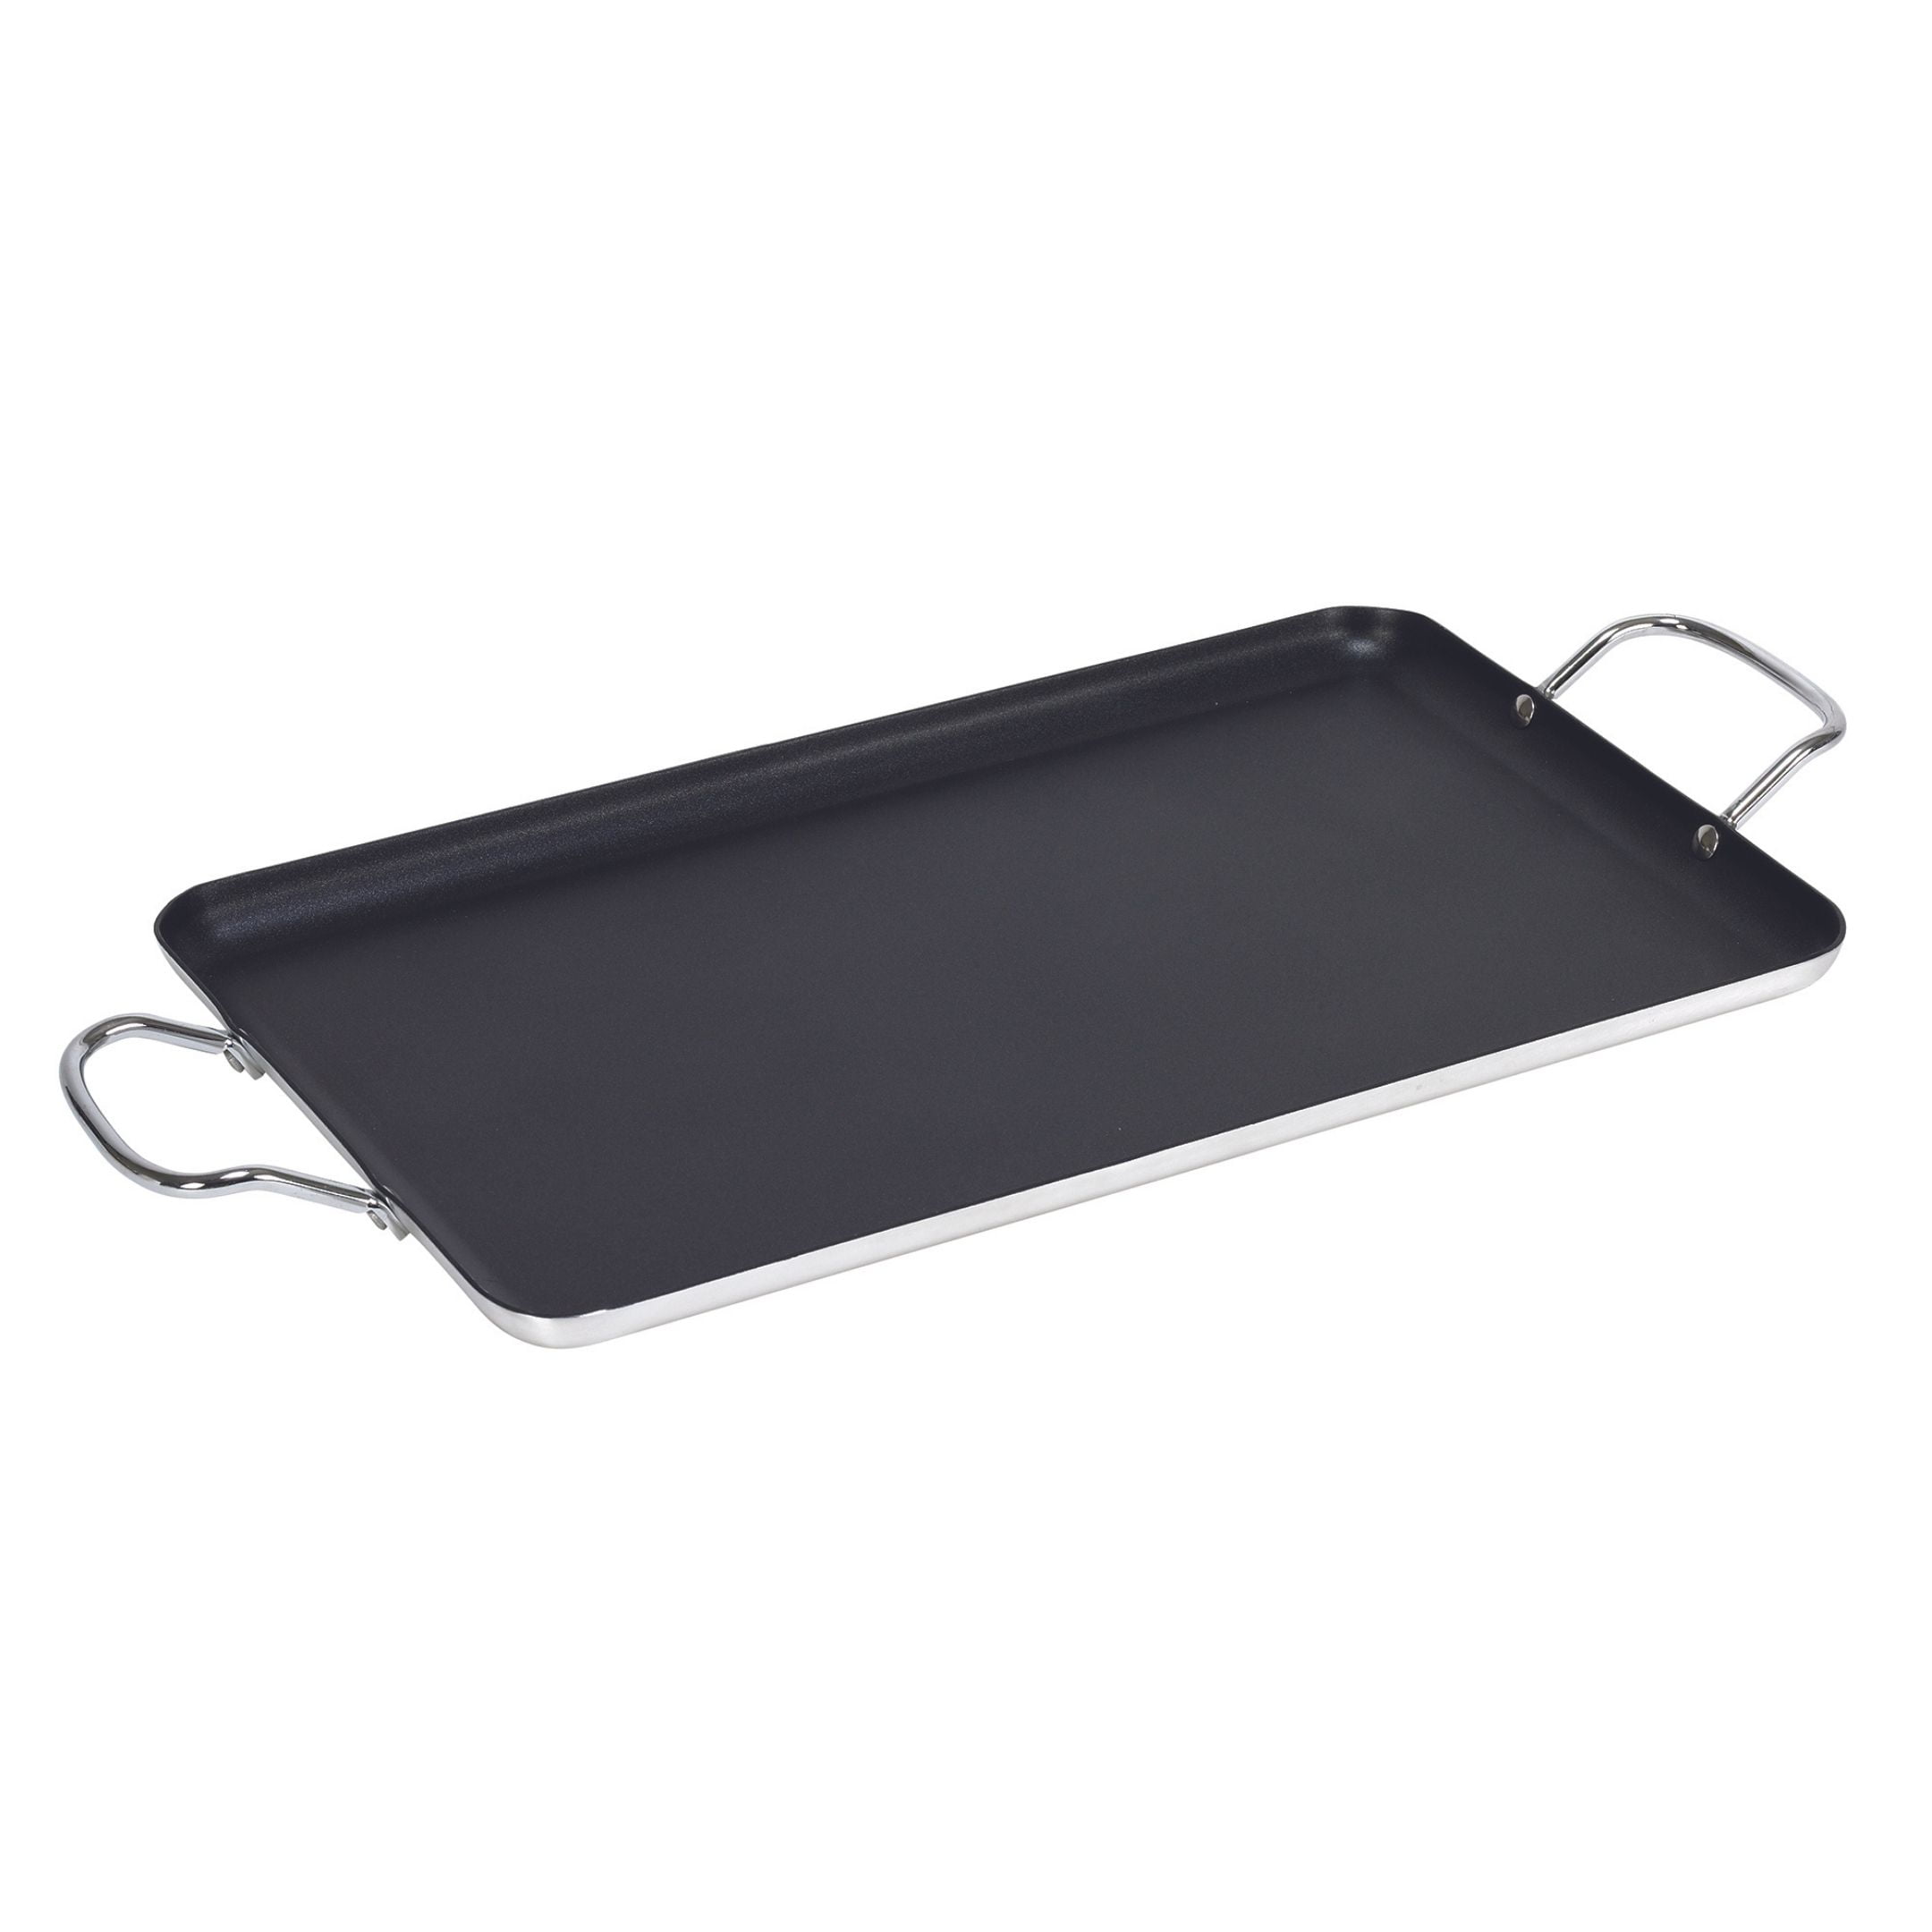 Imusa Large 20 x 12 Nonstick Double Burner Griddle with Metal